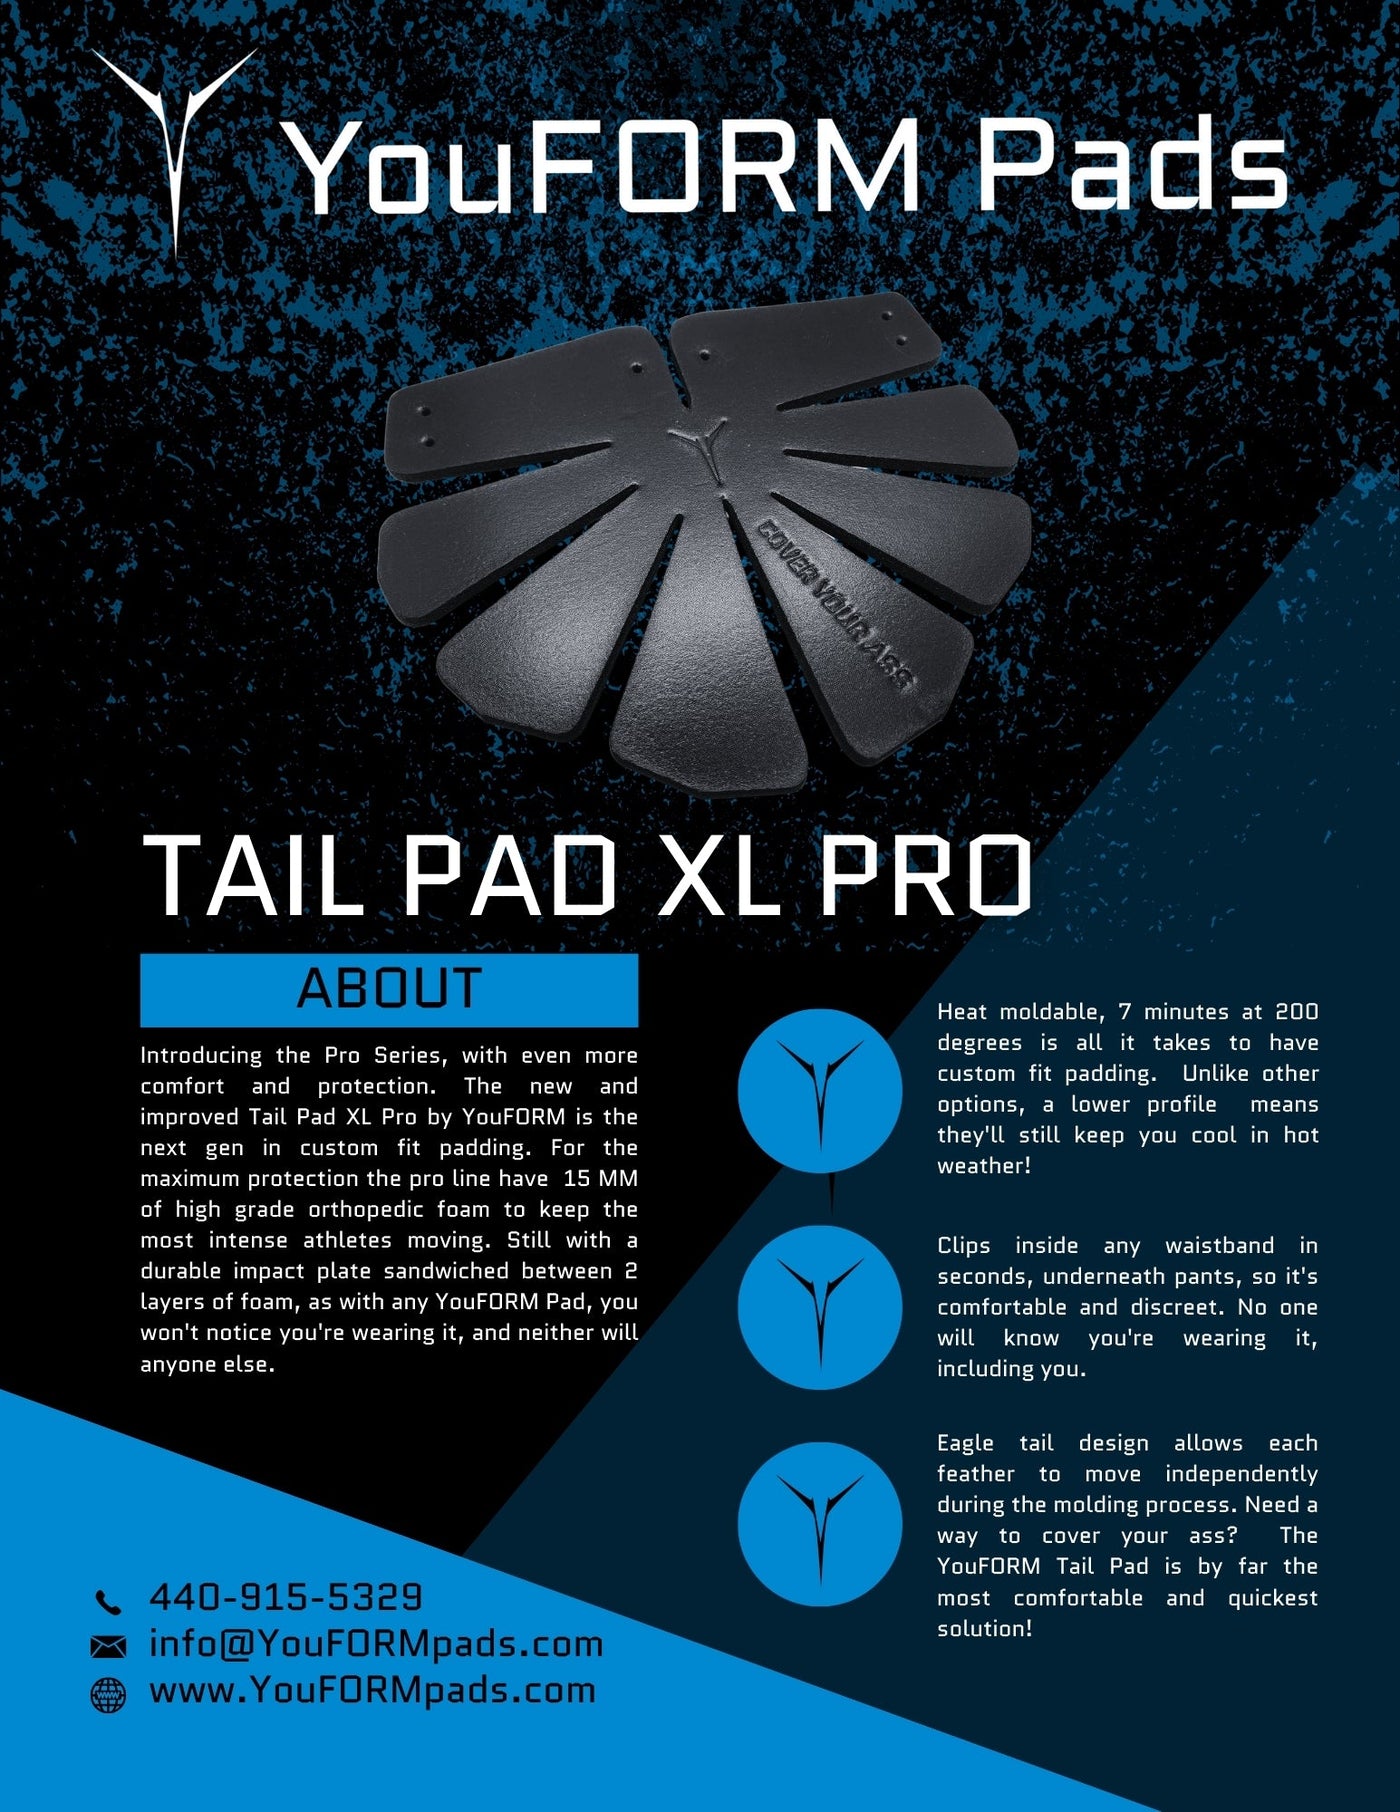 Tail Pad XL Pro by YouFORM